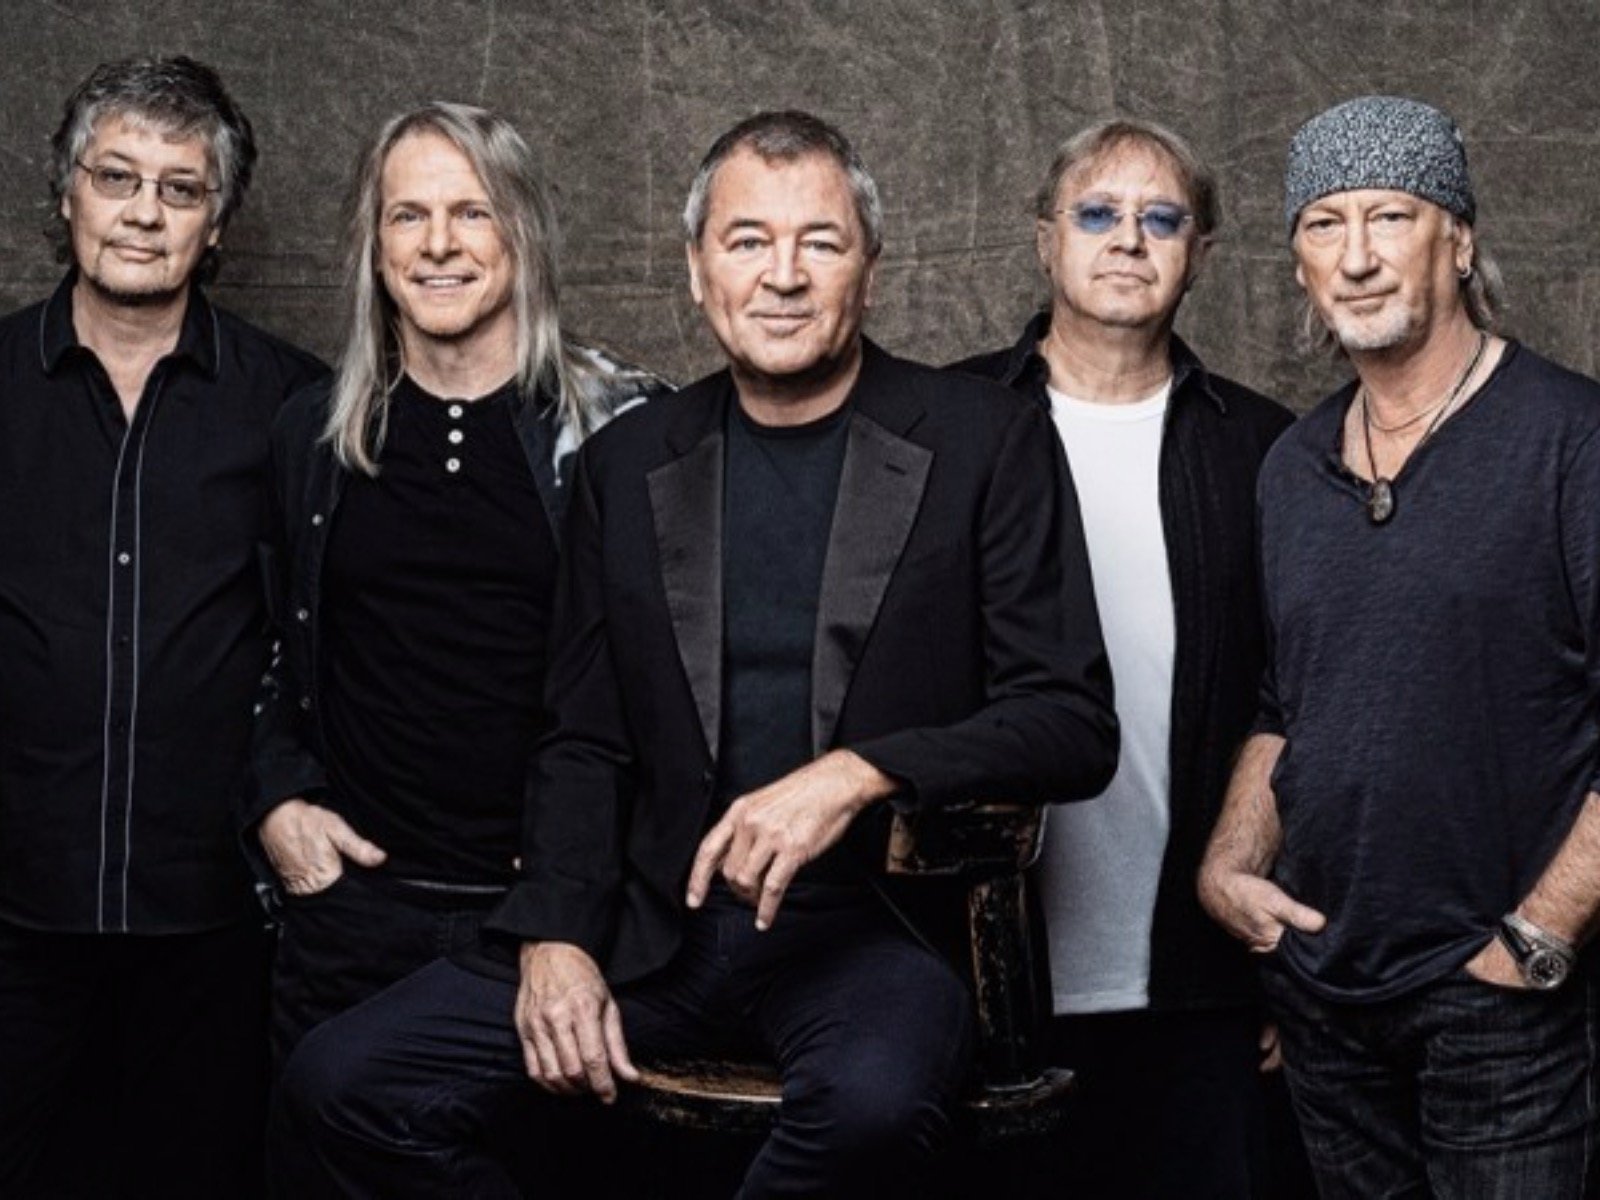 Deep Purple's Roger Glover talks the origins of "Smoke on the Water